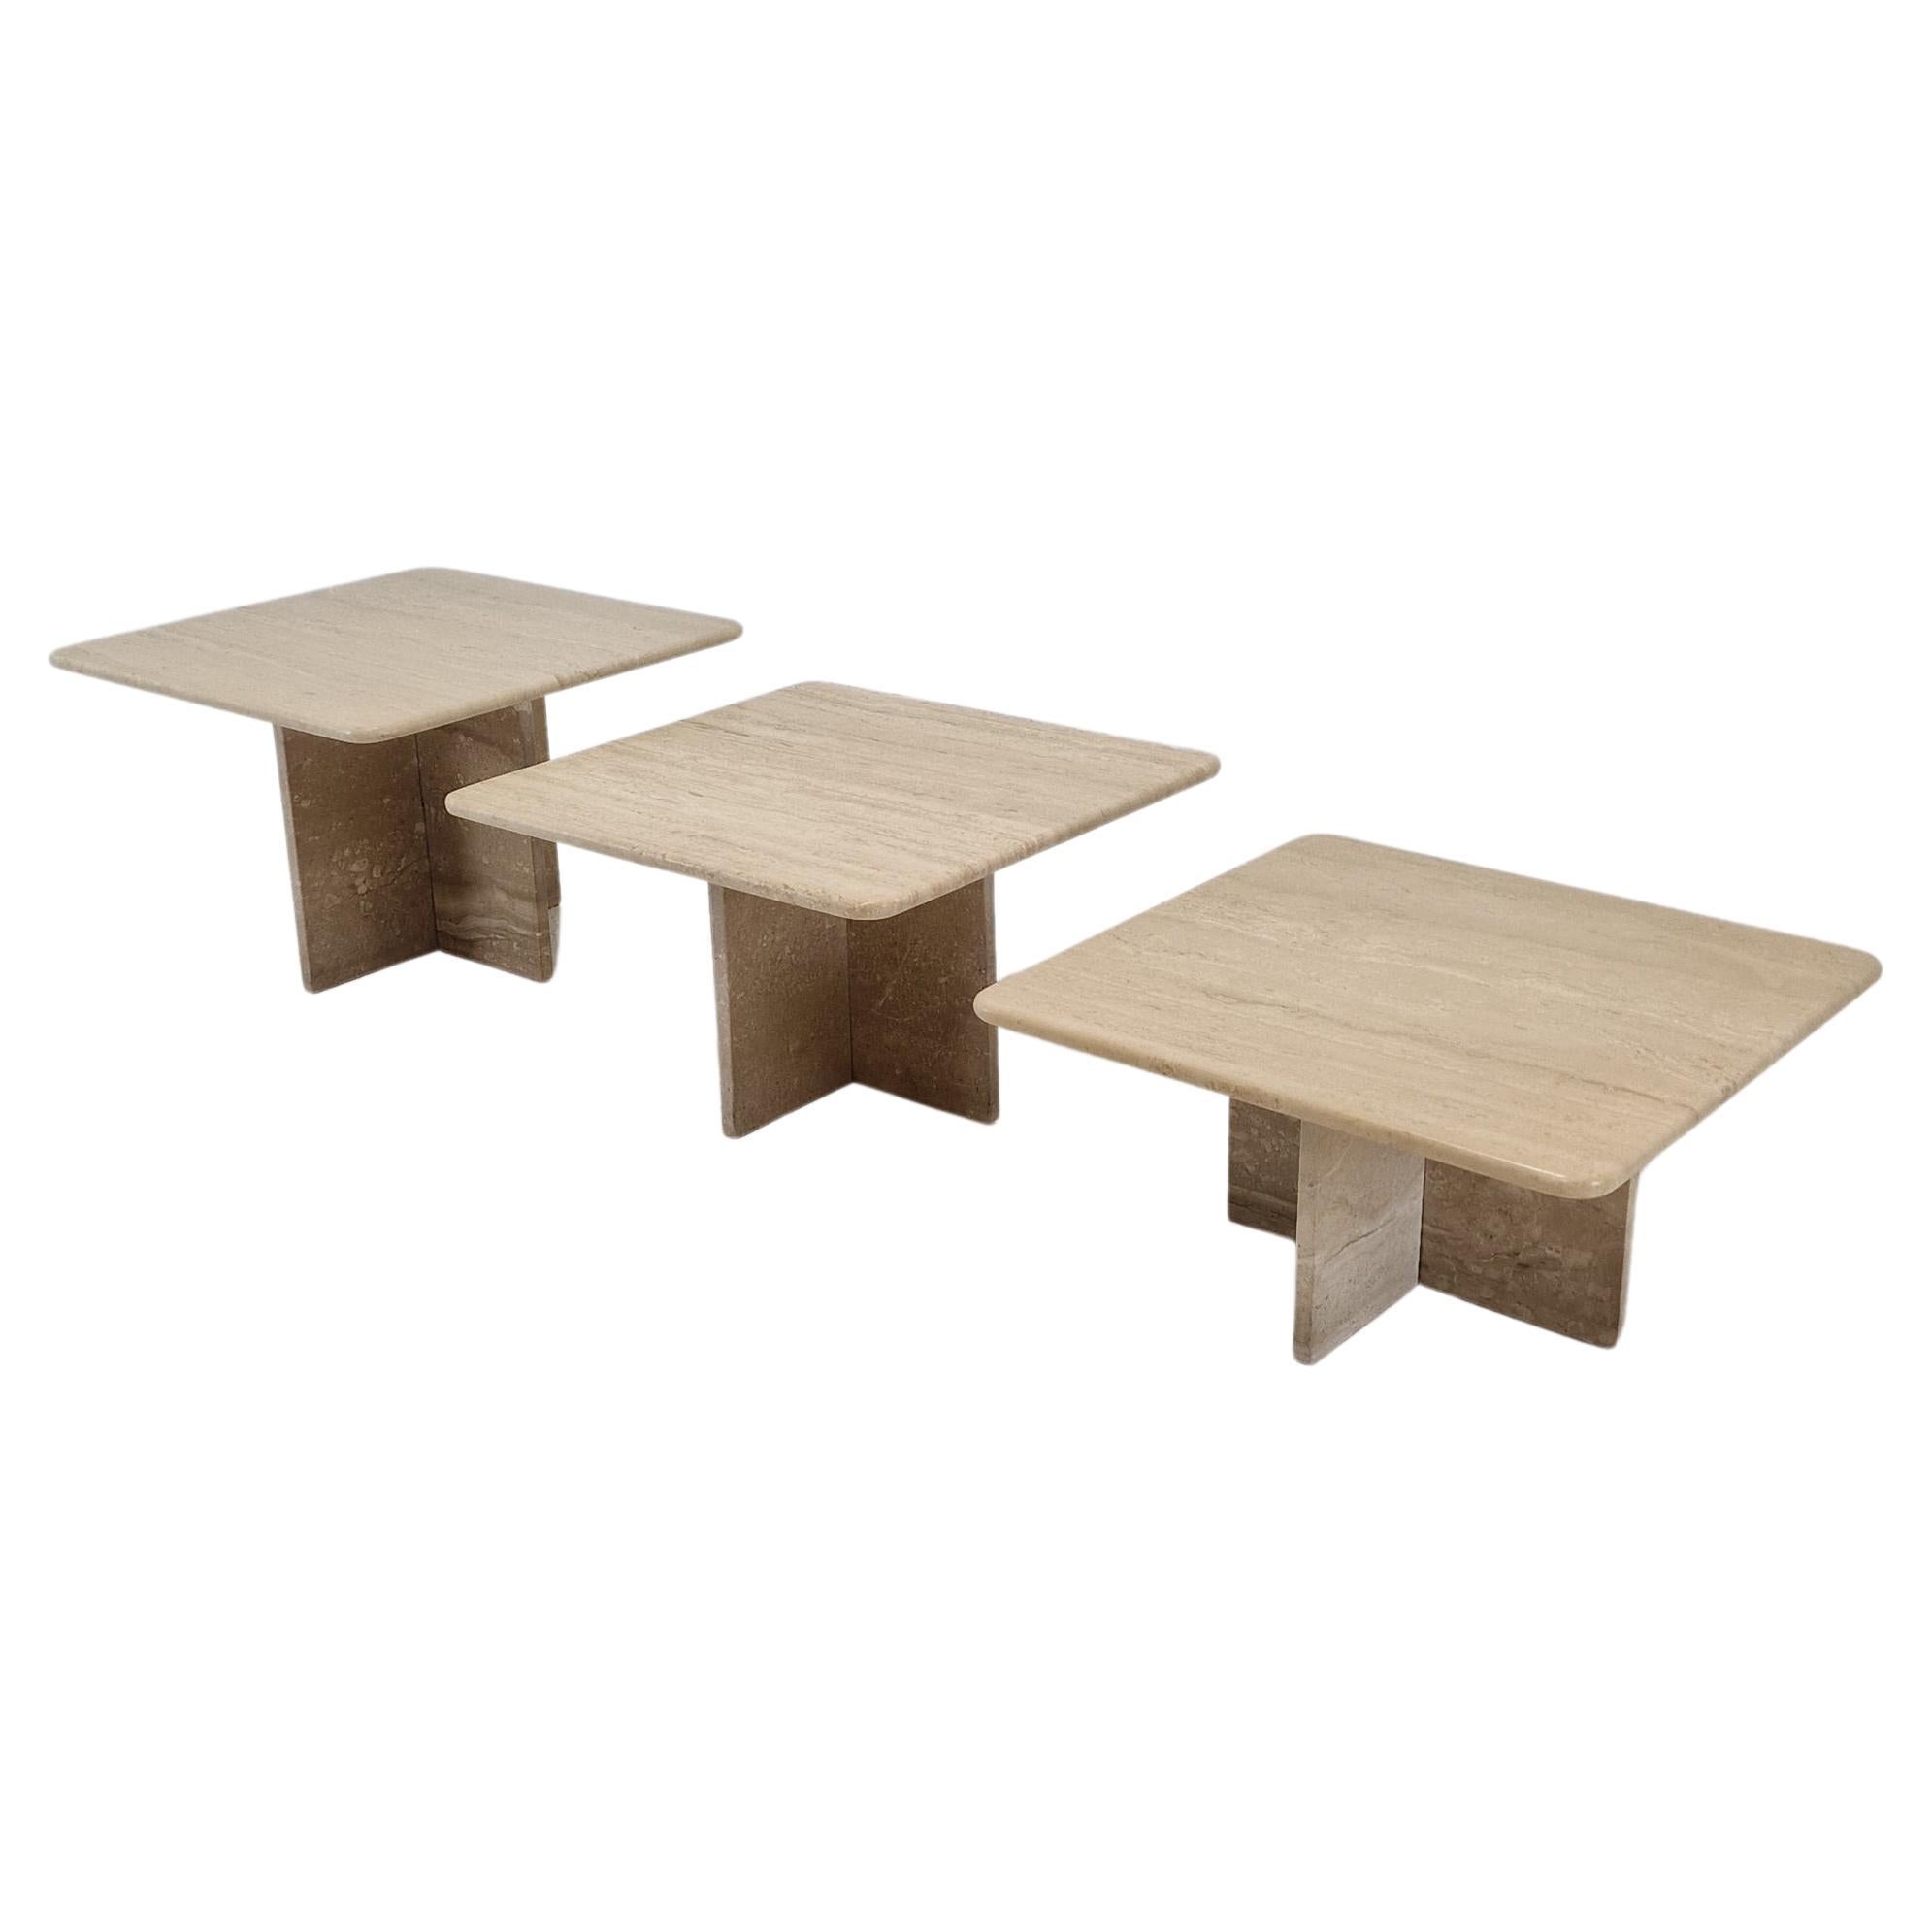 Set of 3 Italian Travertine Coffee or Side Tables, 1990s For Sale